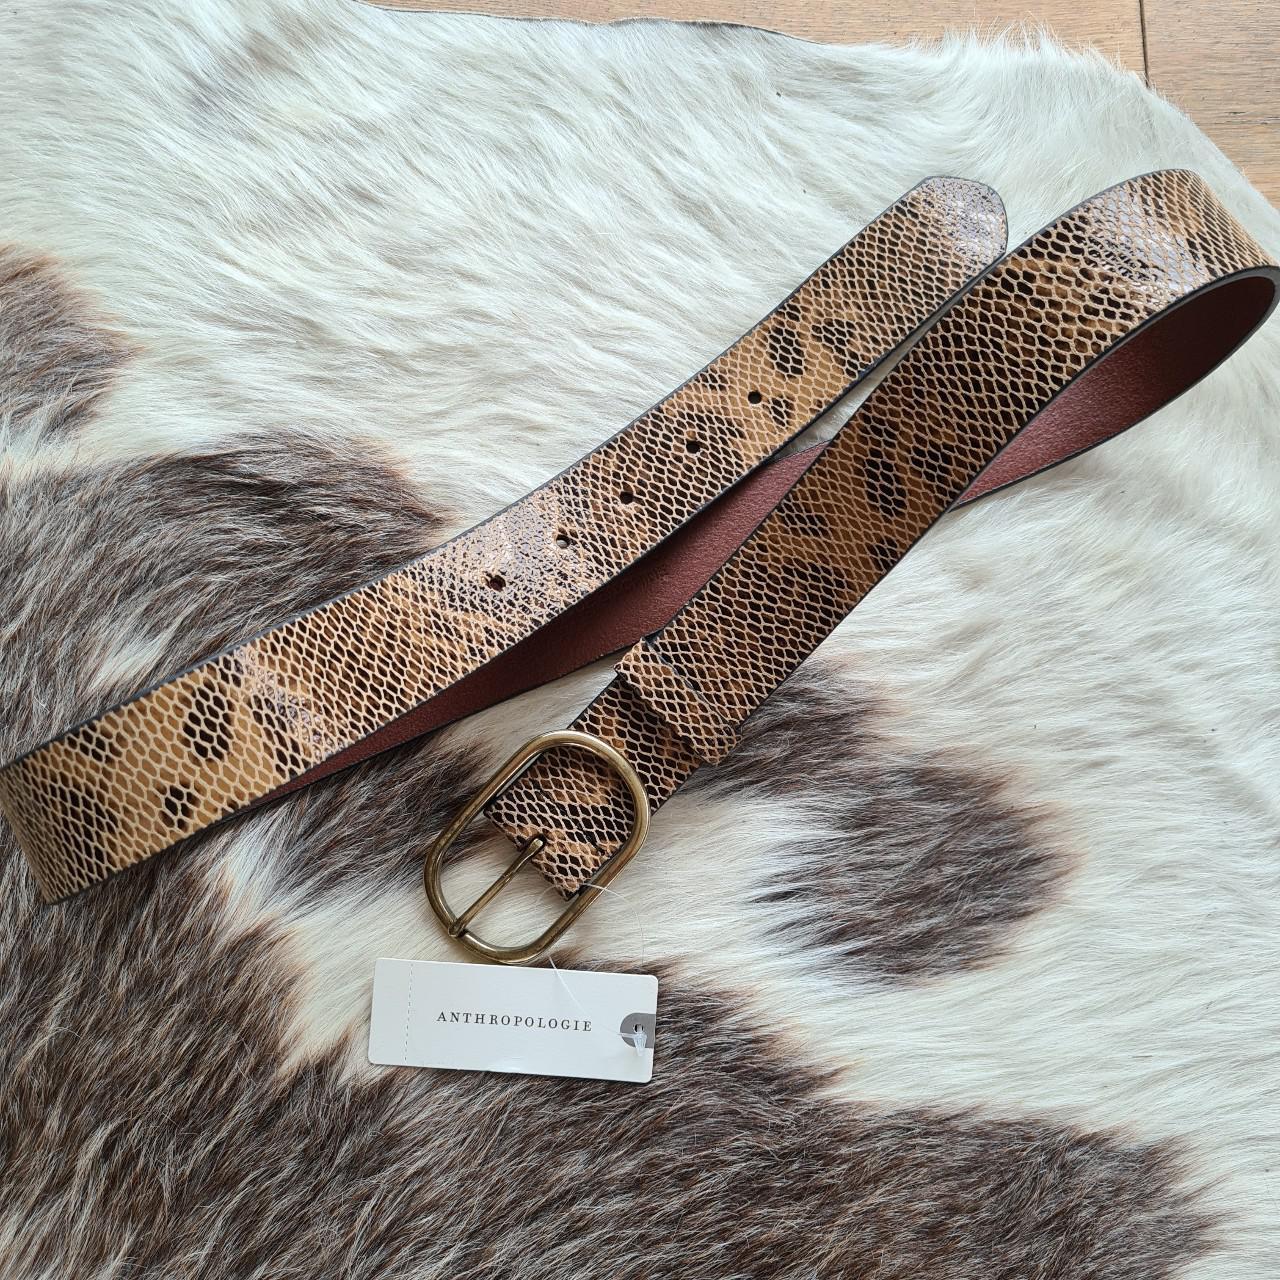 Anthropologie Women's Brown and Gold Belt